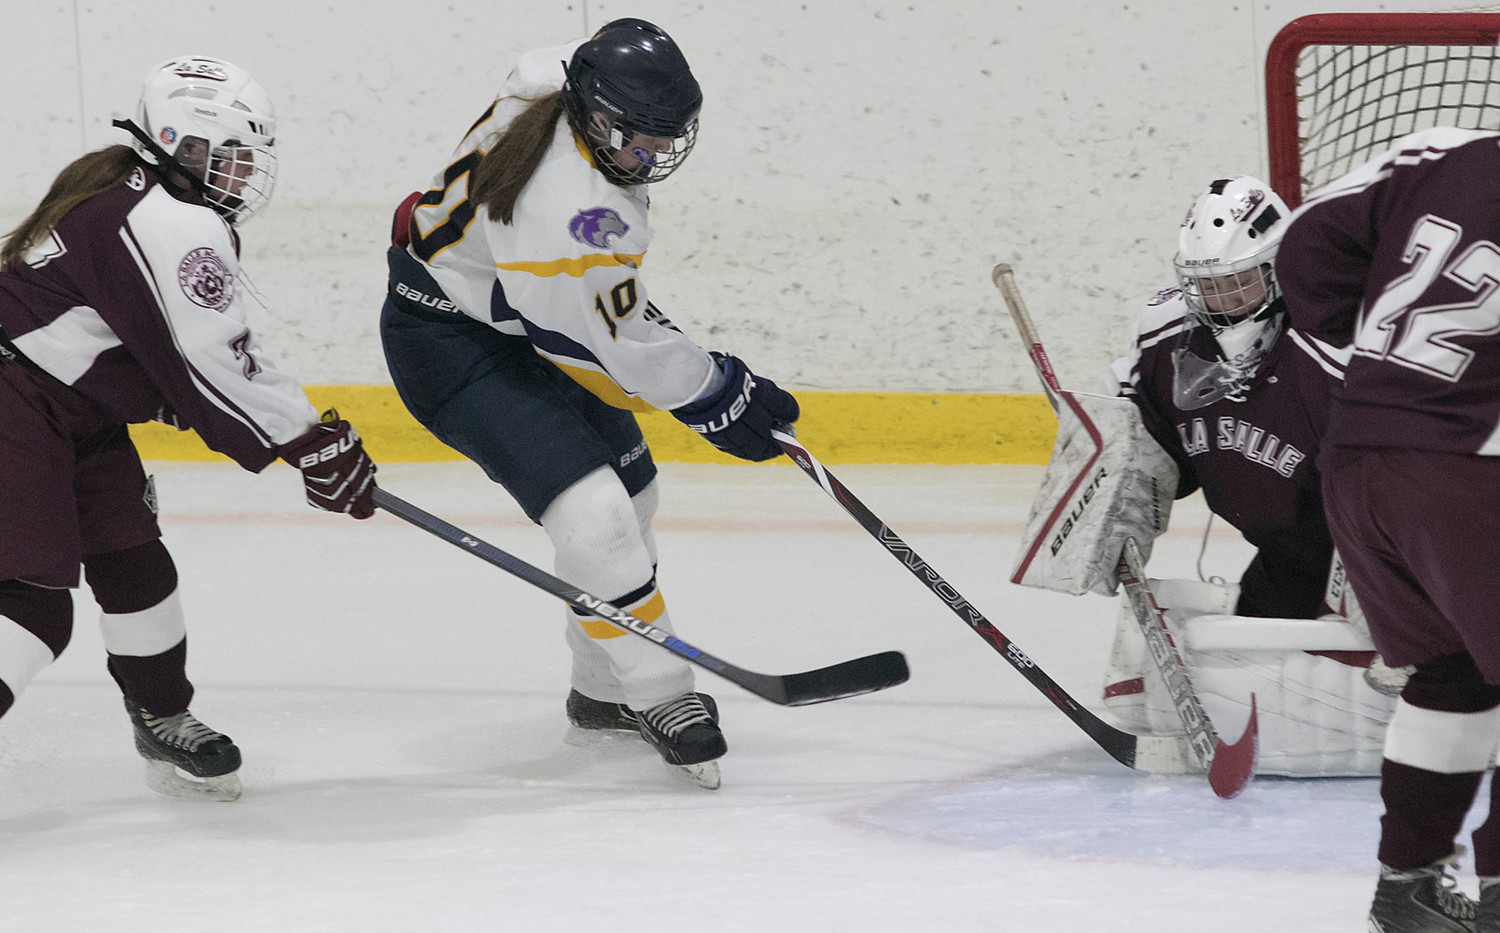 Junior defenseman Madelyn Cox stuffs the puck by La Salle goaltender Asia Porter to tie the score late in the third period.